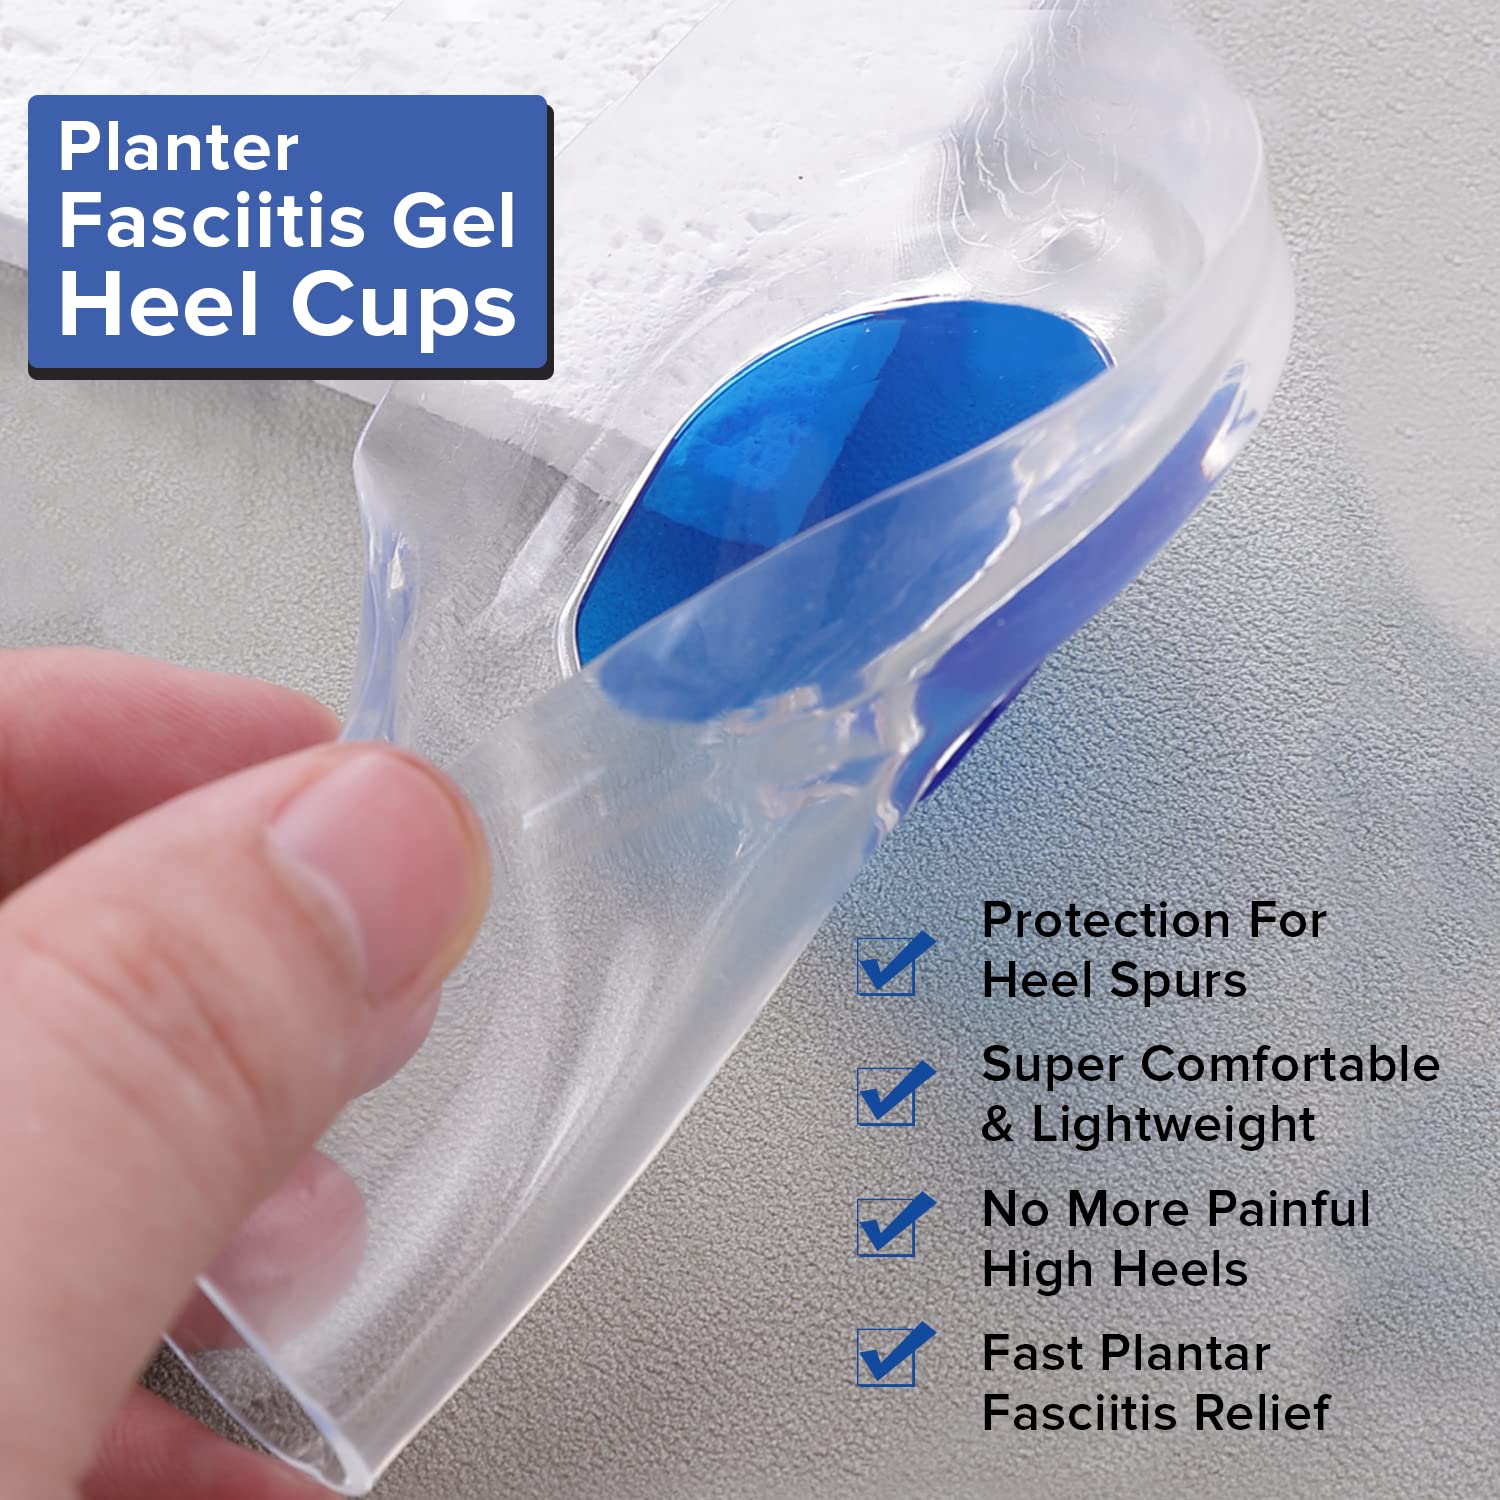 Amazon.com: Heel That Pain Plantar Fasciitis Insoles | Heel Seats Foot  Orthotic Inserts, Heel Cups for Heel Pain and Heel Spurs | Patented,  Clinically Proven, 100% Guaranteed | Blue, Large (Women's 10.5-13,